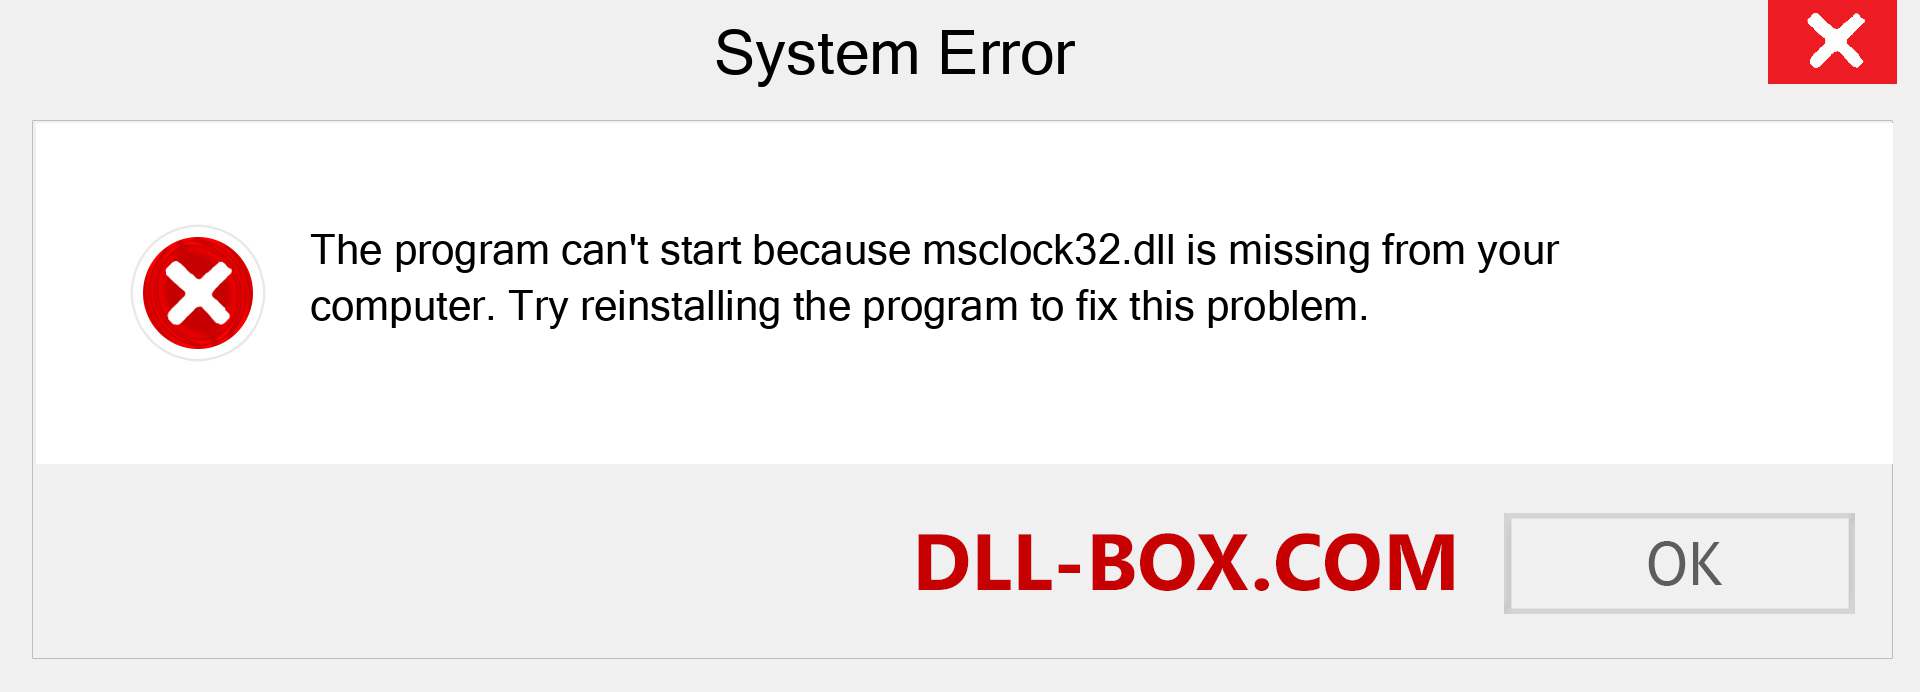  msclock32.dll file is missing?. Download for Windows 7, 8, 10 - Fix  msclock32 dll Missing Error on Windows, photos, images